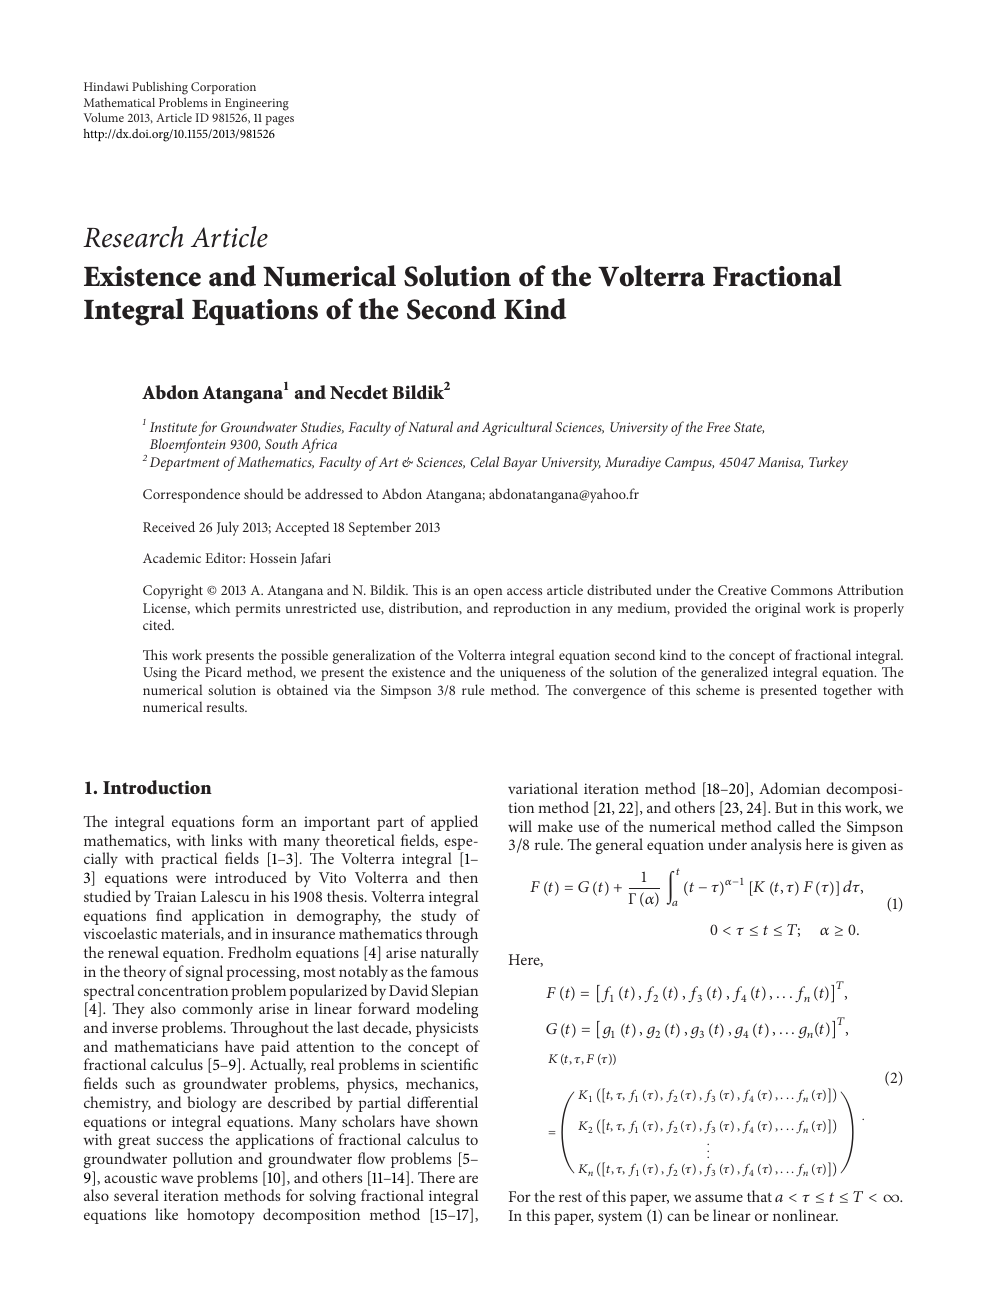 Existence And Numerical Solution Of The Volterra Fractional Integral Equations Of The Second Kind Topic Of Research Paper In Mathematics Download Scholarly Article Pdf And Read For Free On Cyberleninka Open